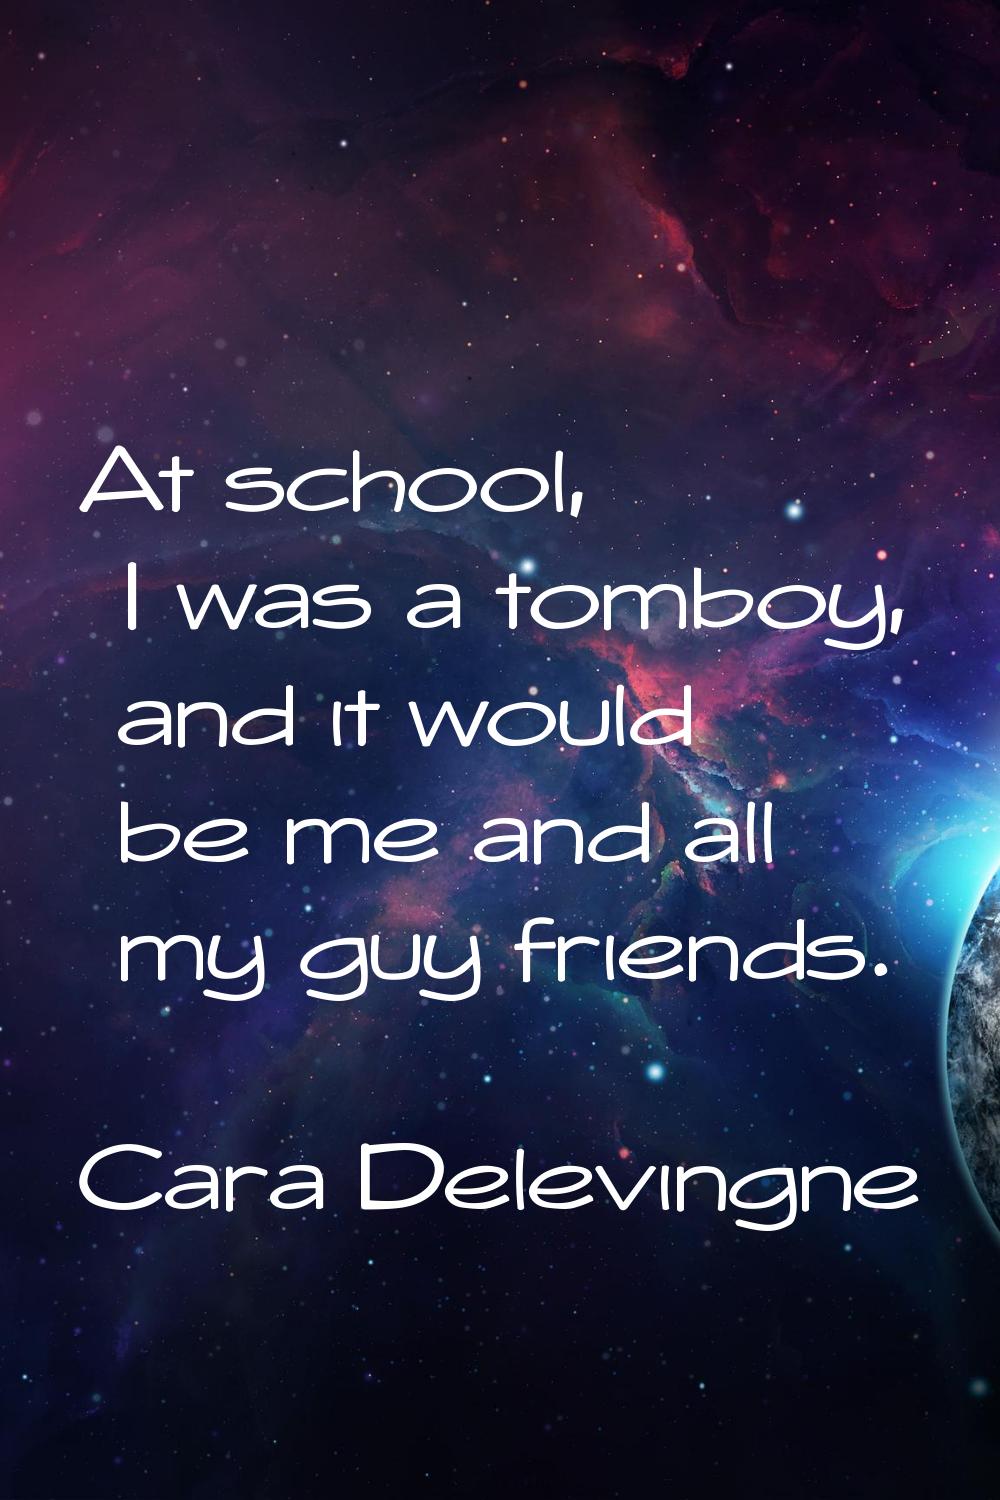 At school, I was a tomboy, and it would be me and all my guy friends.